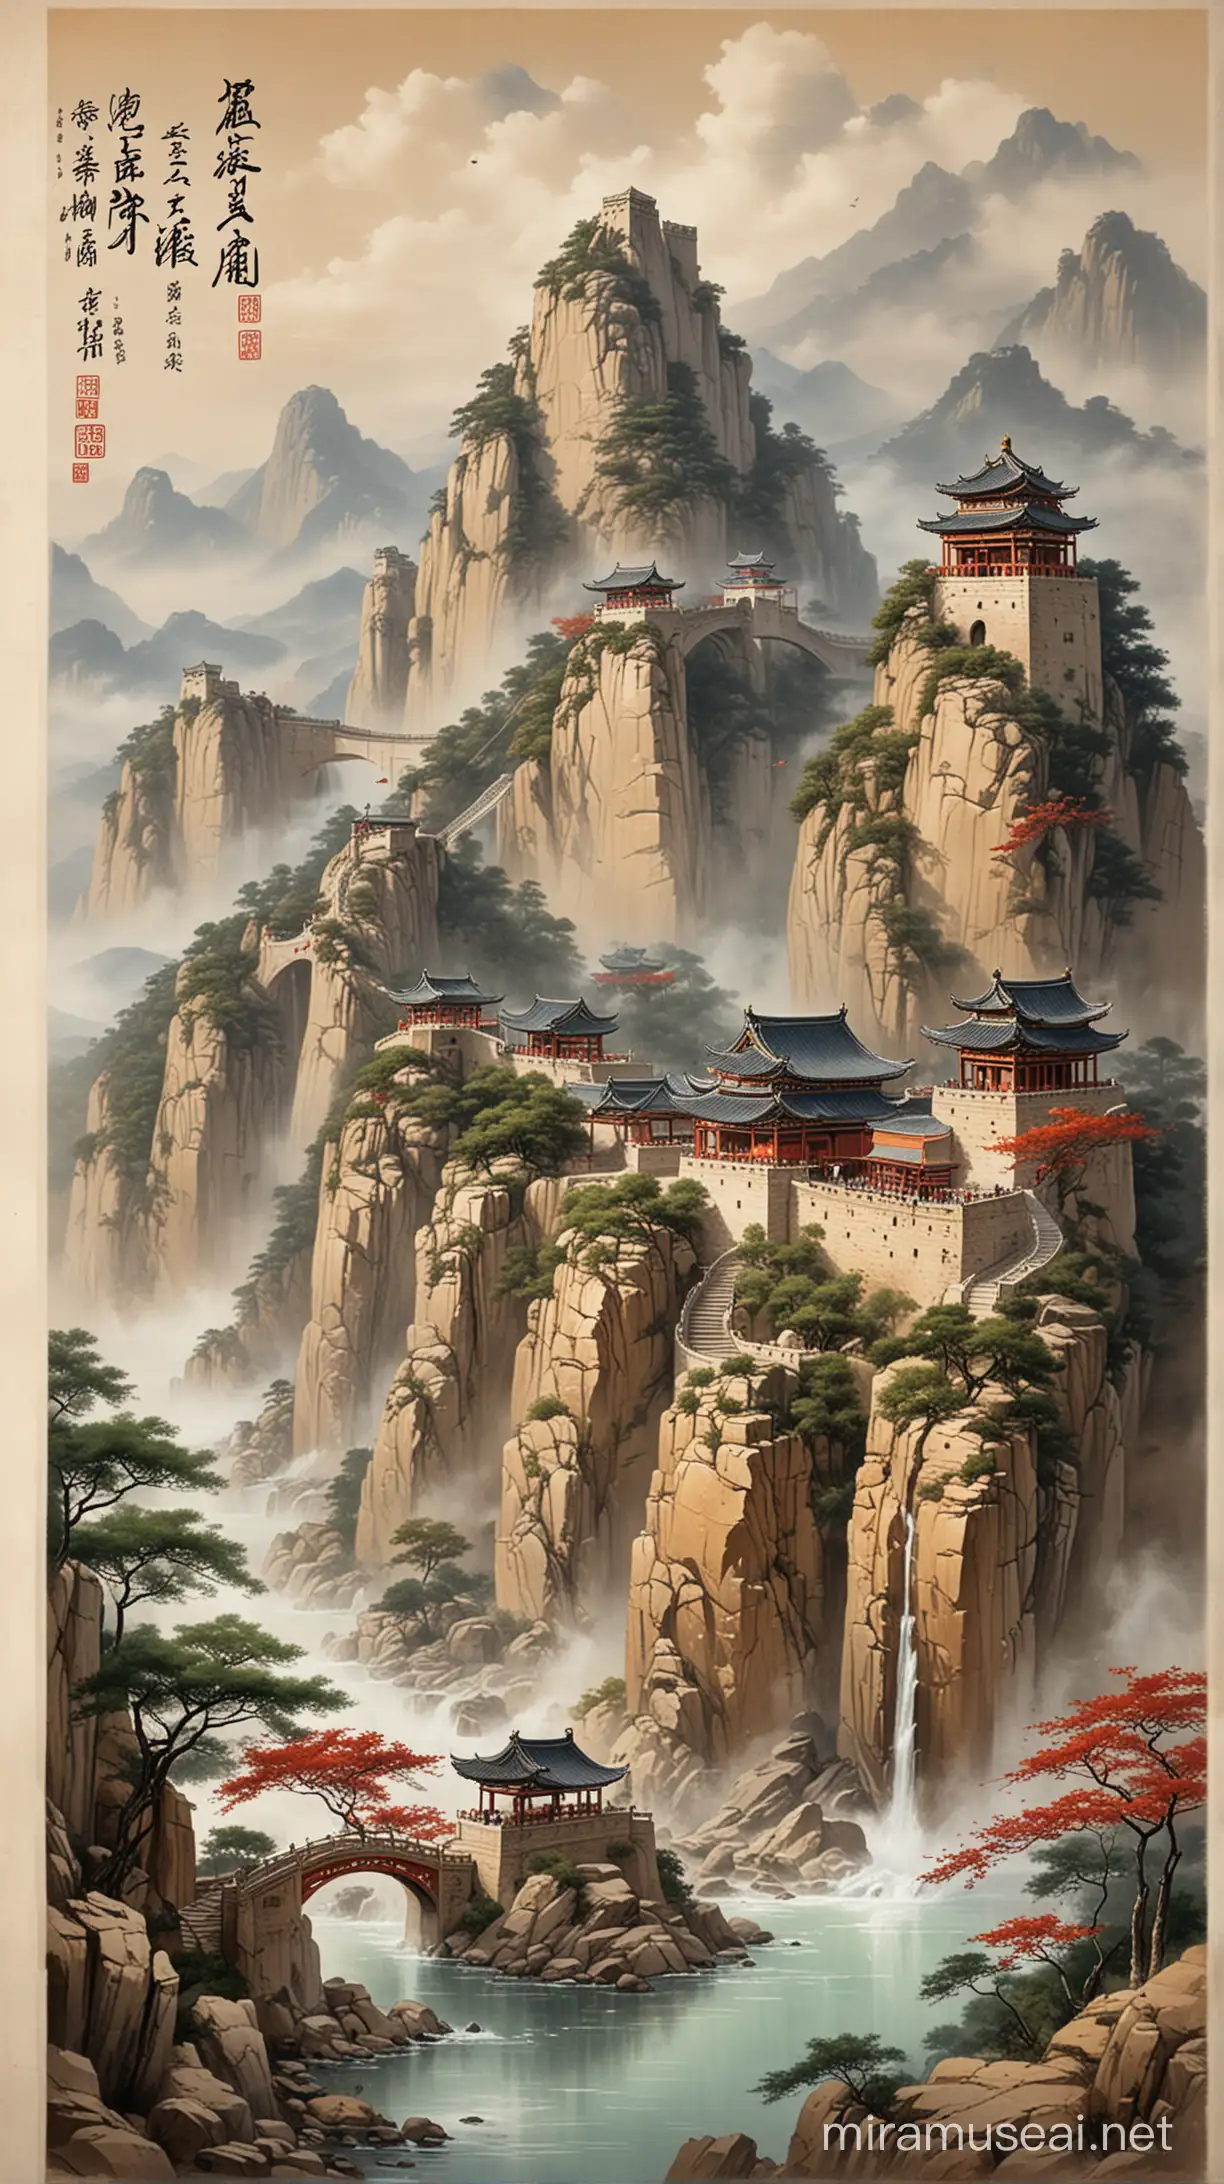 Ancient Chinese Cityscape with Warriors and Calligraphy